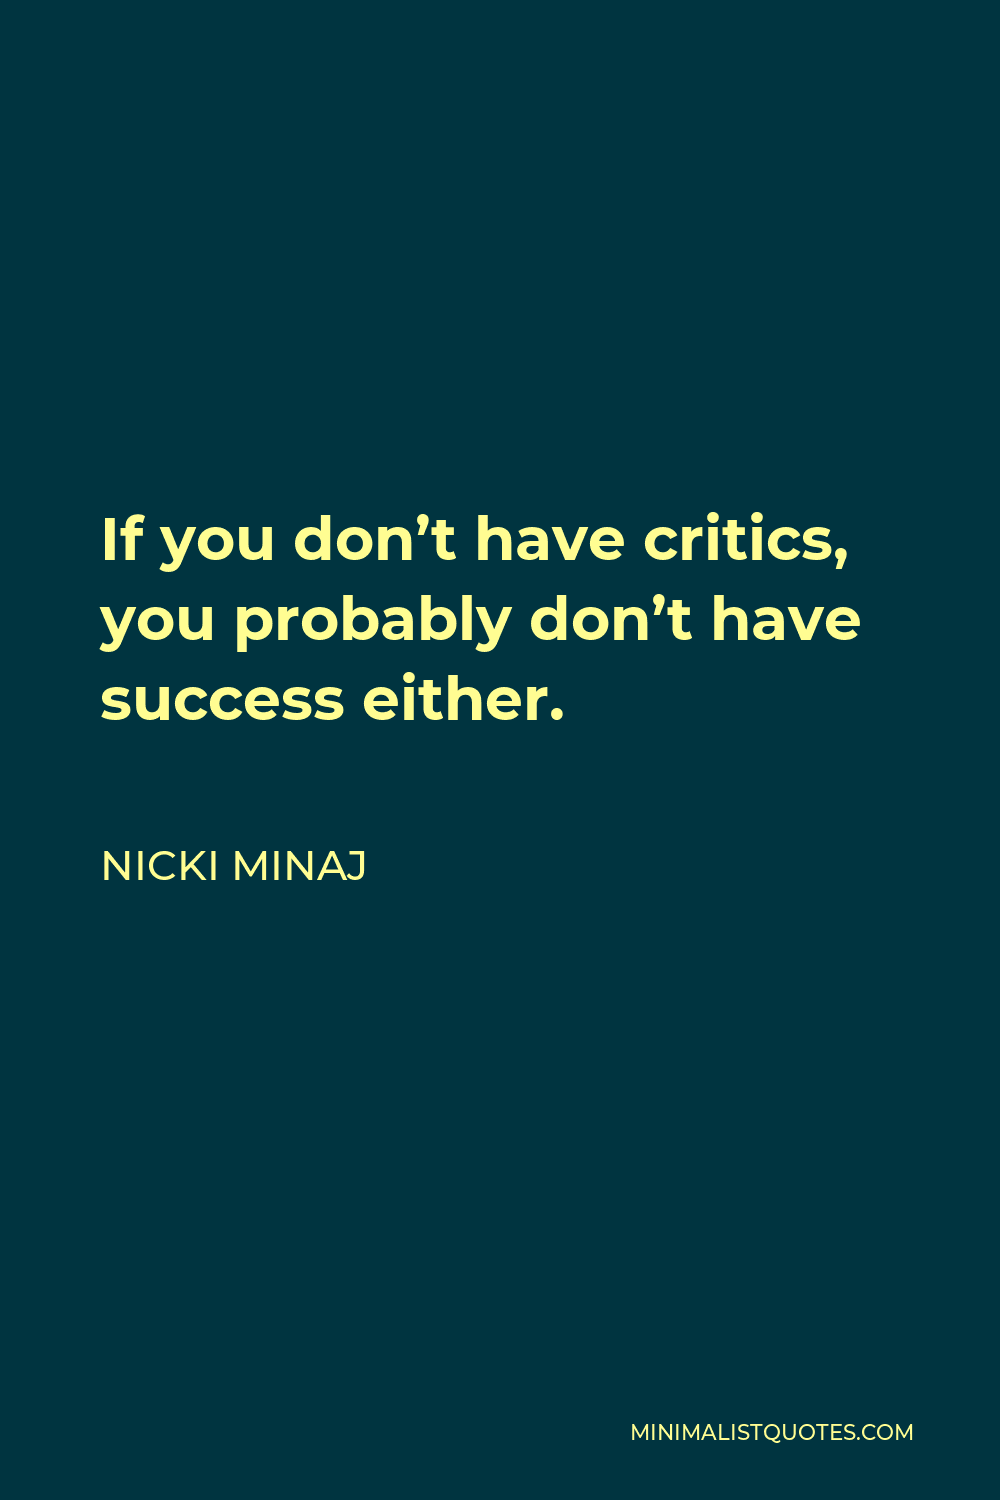 Nicki Minaj Quote: To adjust your philosophy and creativity in